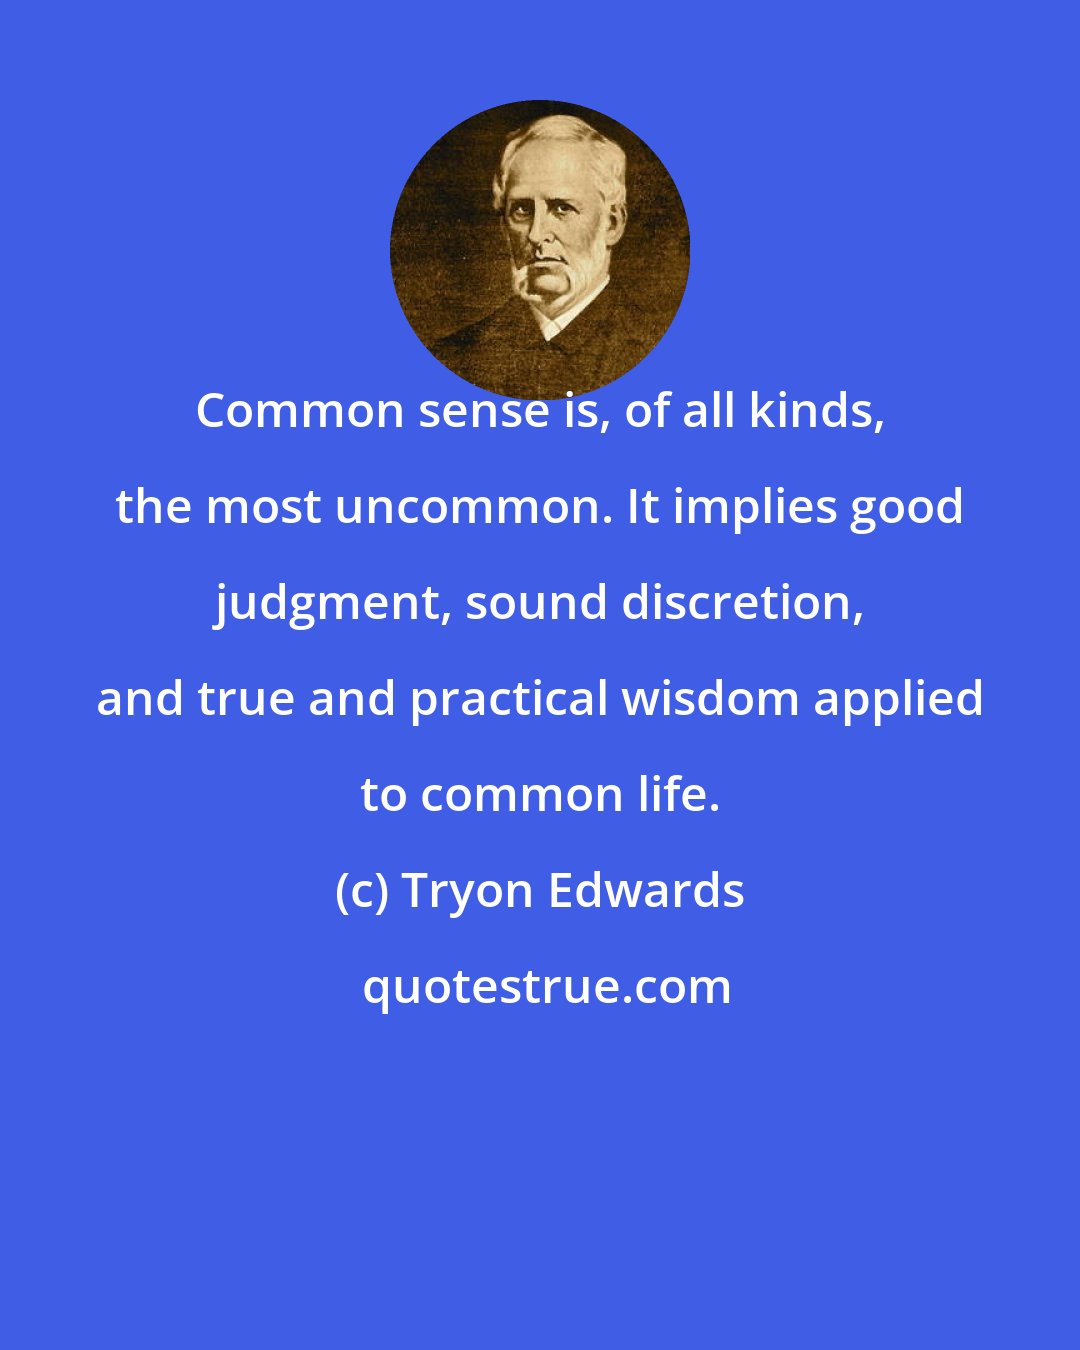 Tryon Edwards: Common sense is, of all kinds, the most uncommon. It implies good judgment, sound discretion, and true and practical wisdom applied to common life.